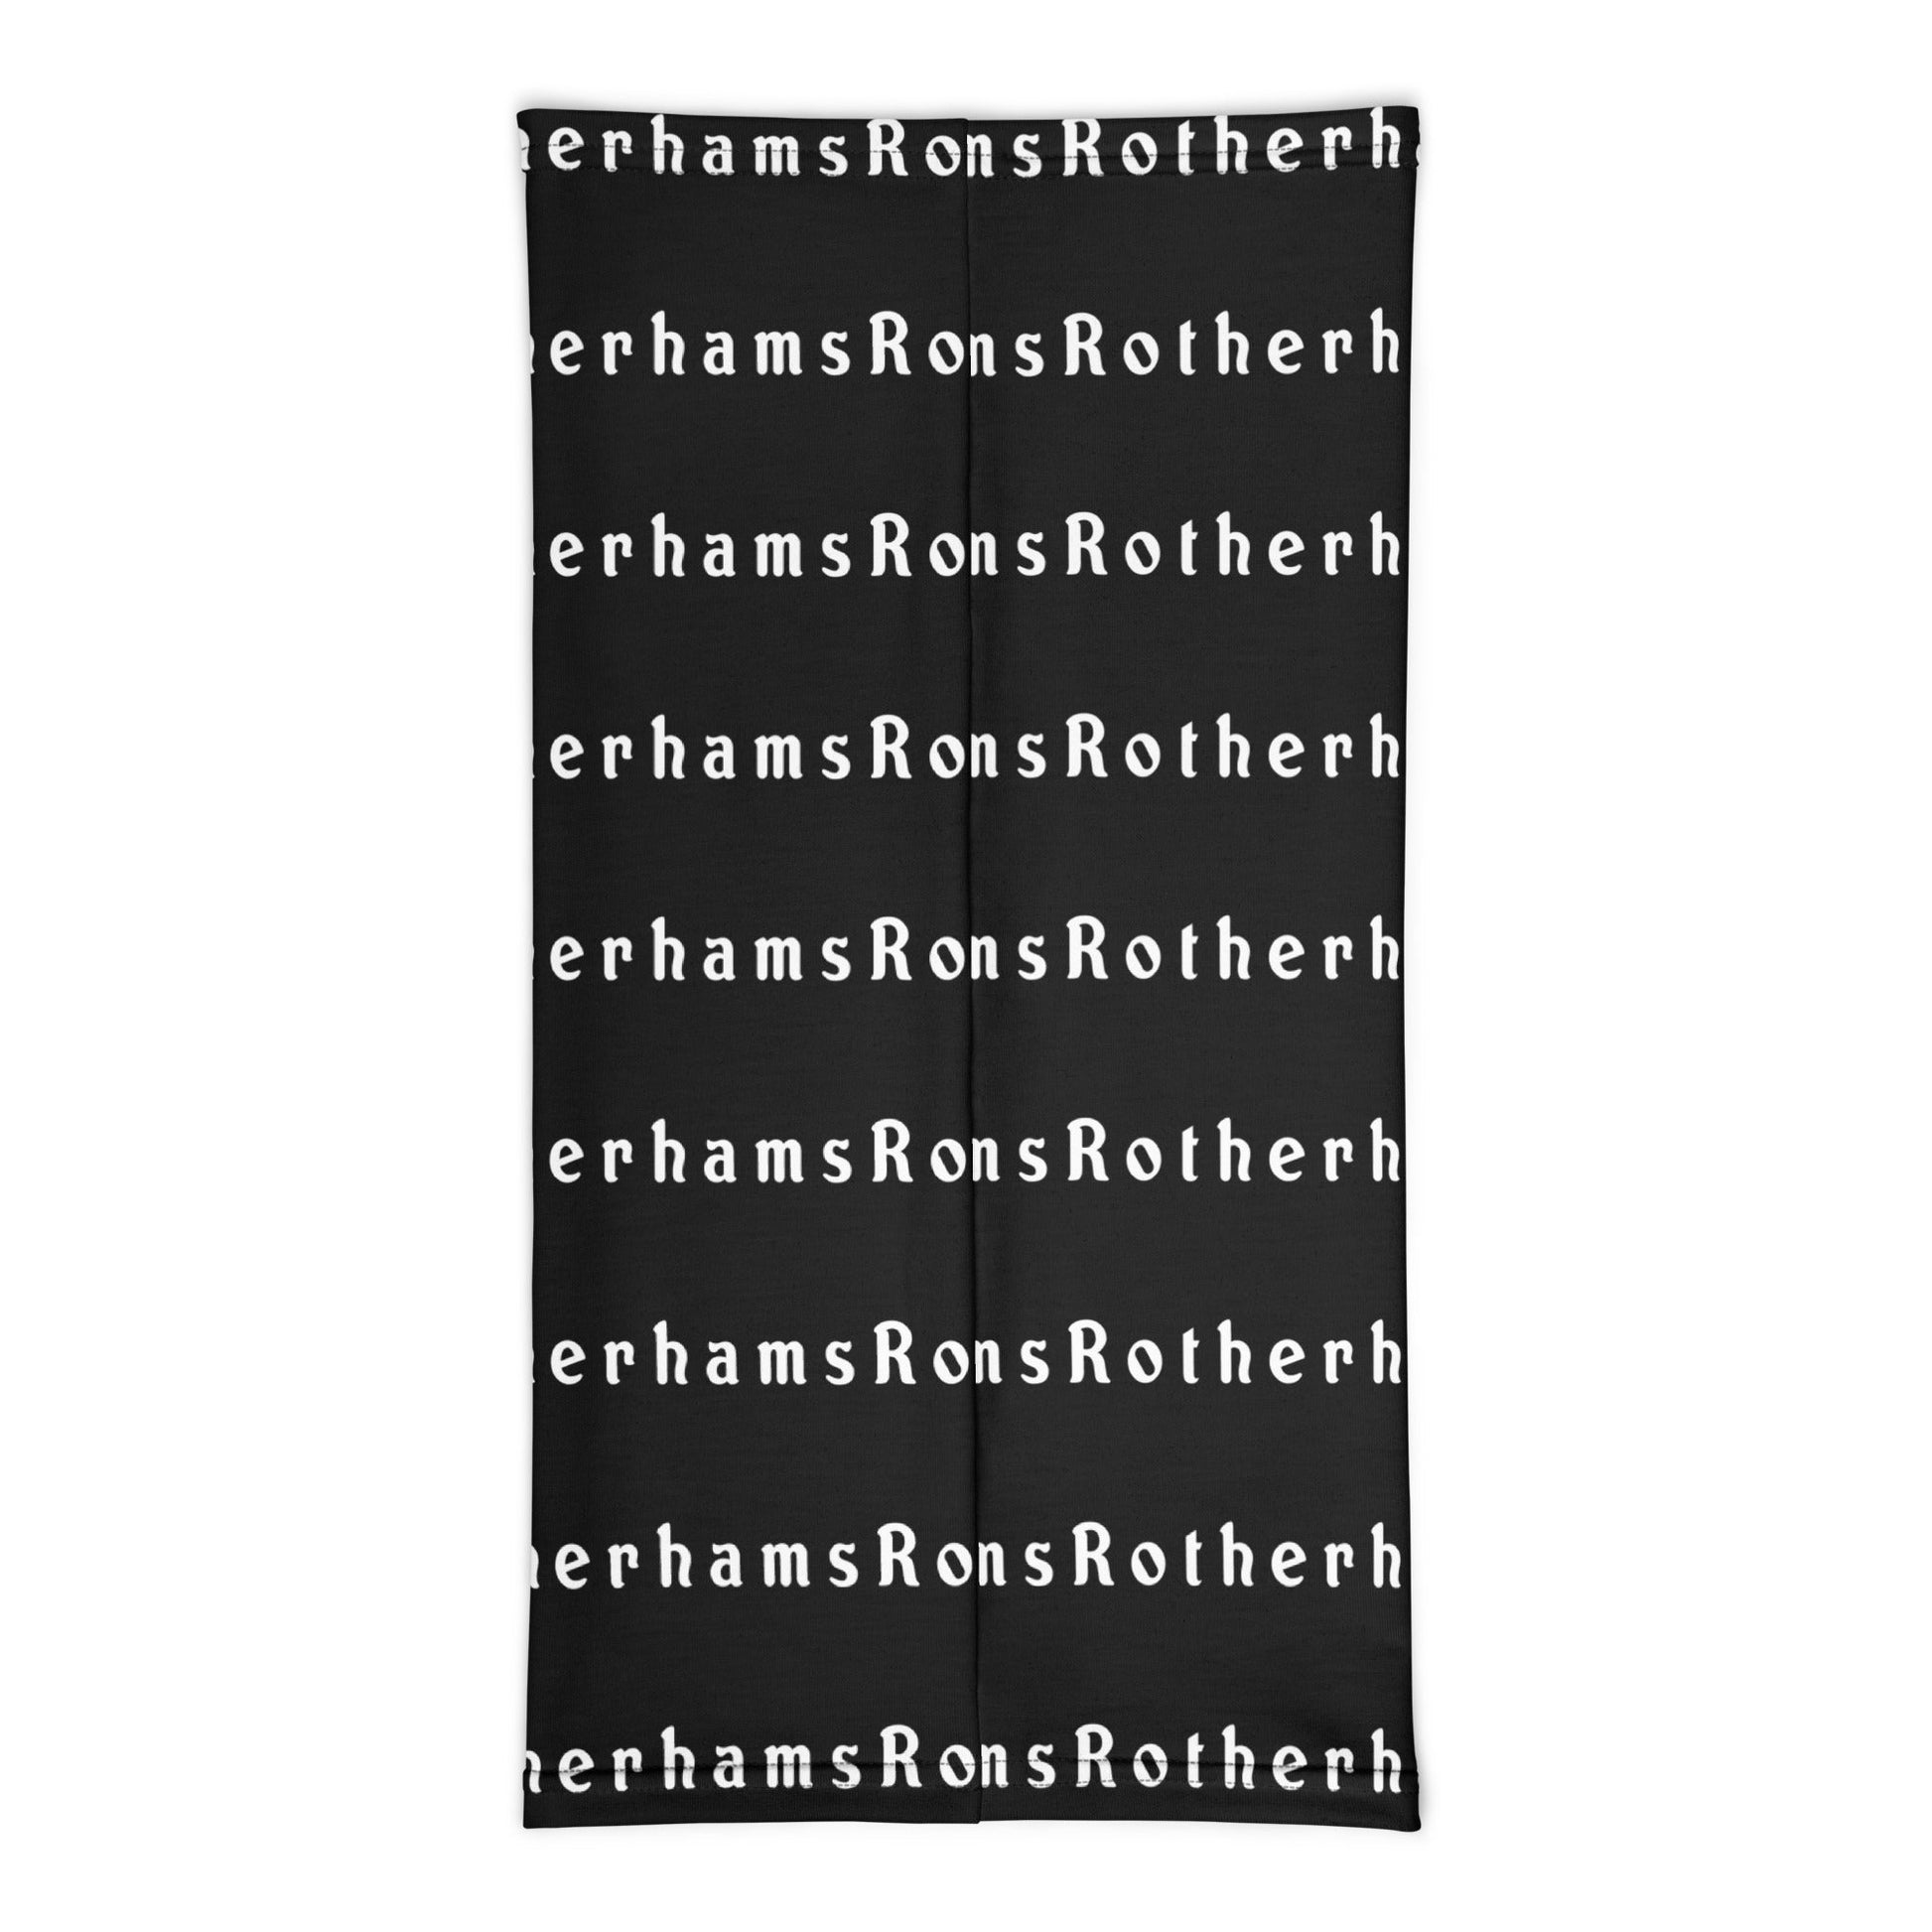 Rotherhams Road Racing Motorcycle Neck Gaiter Face Mask Snood - Rotherhams